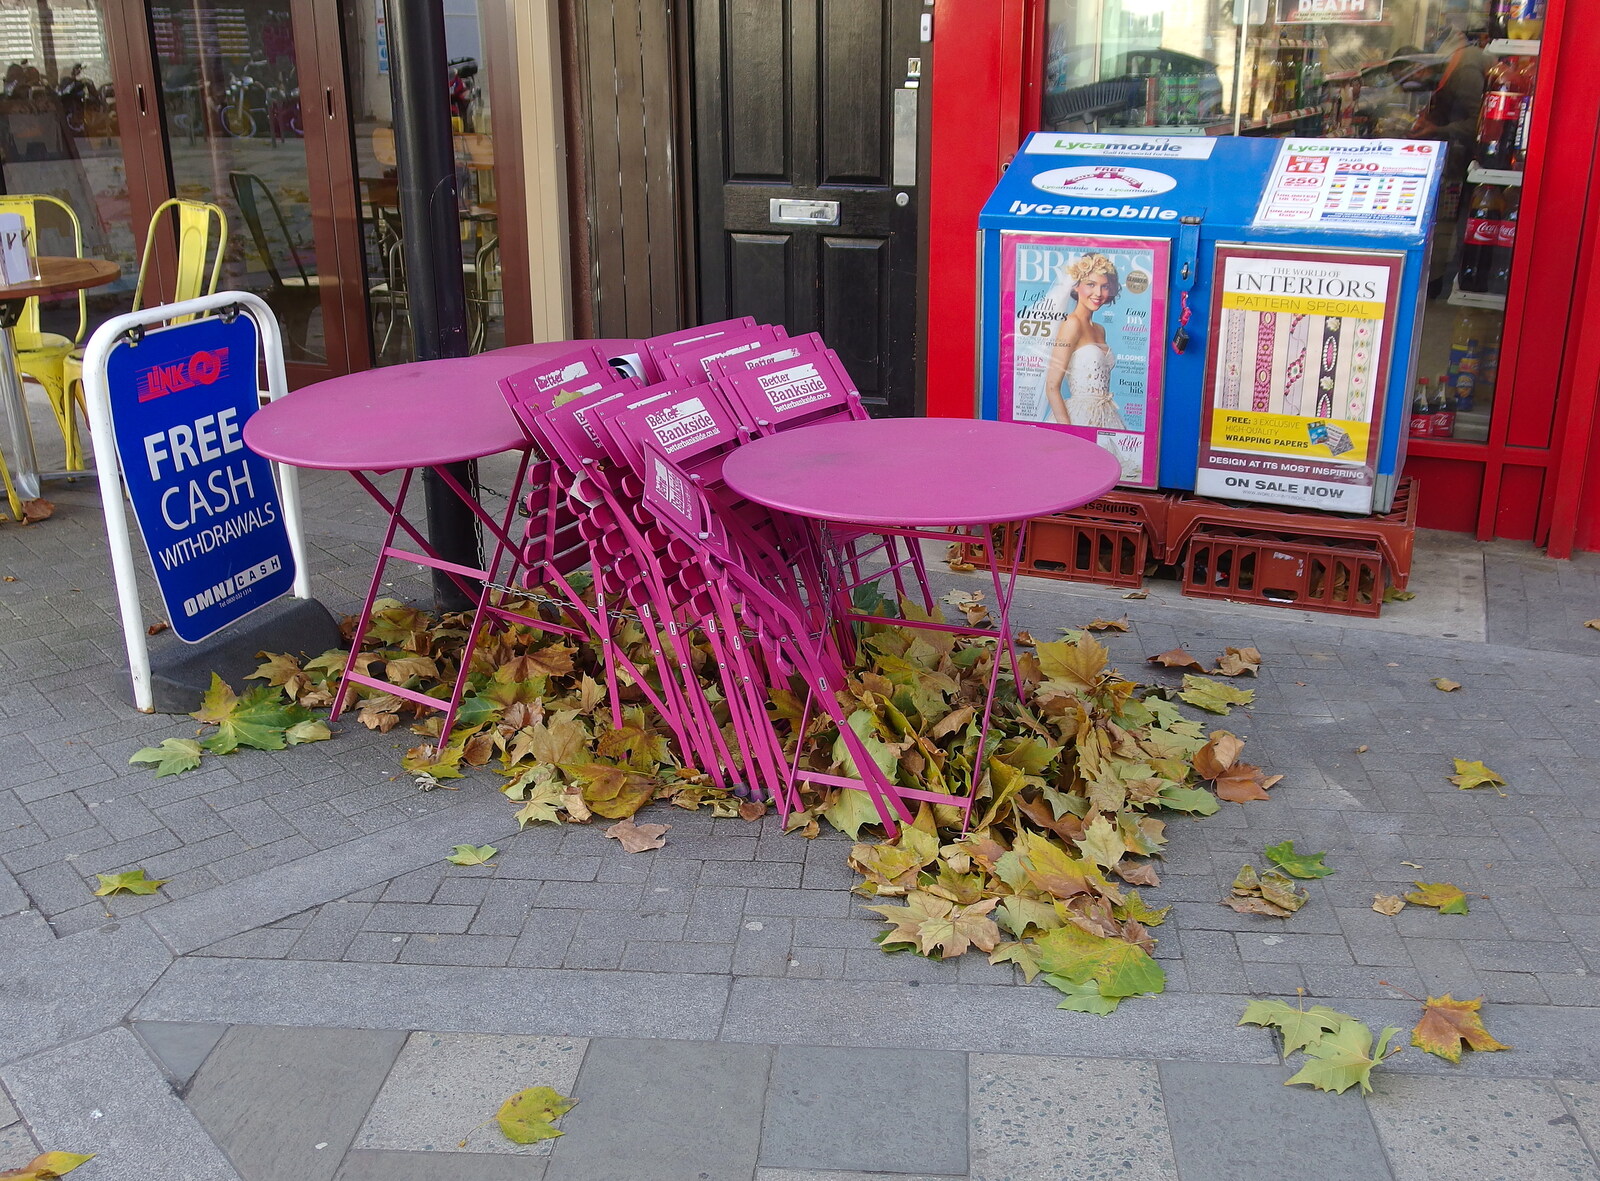 SwiftKey's Arcade Cabinet, and the Streets of Southwark, London - 5th December 2013: A pile of leaves around pink café furniture